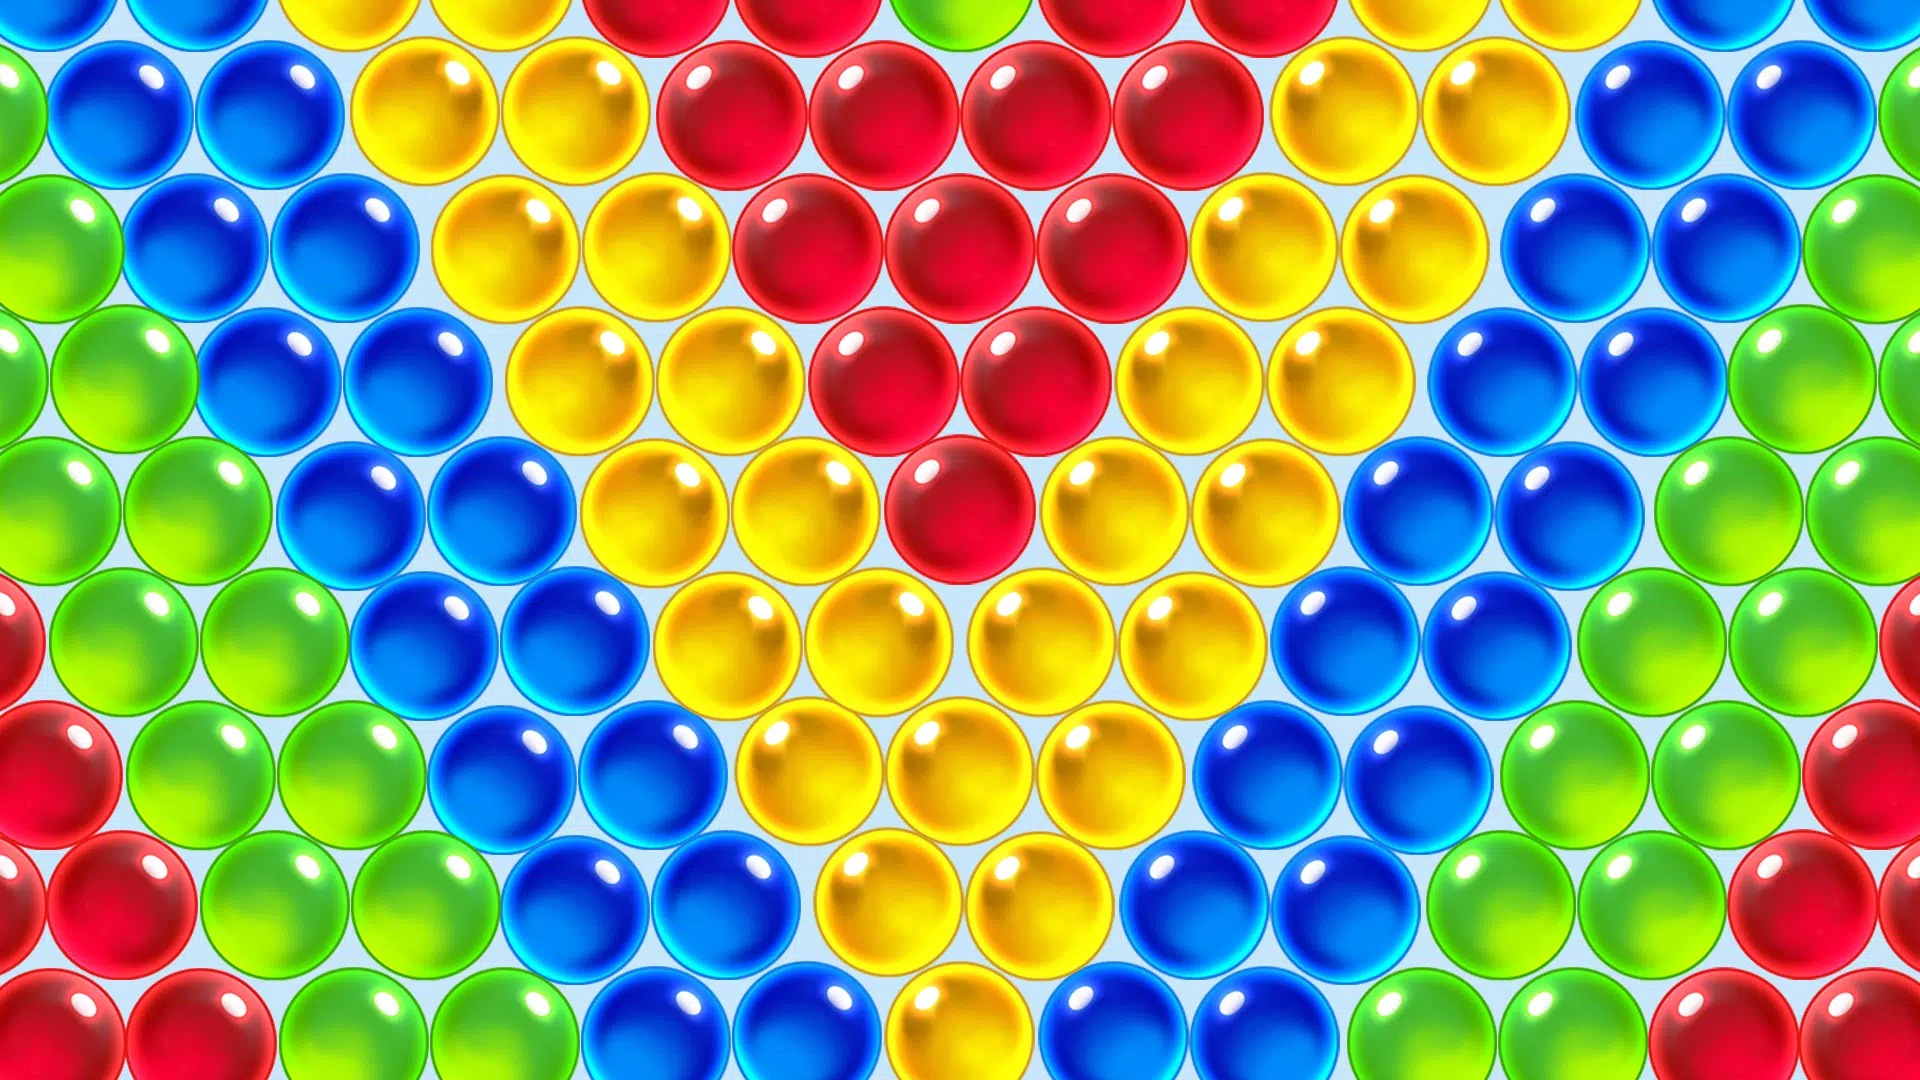 Bubble Shooter Relaxing Game for Android - Download